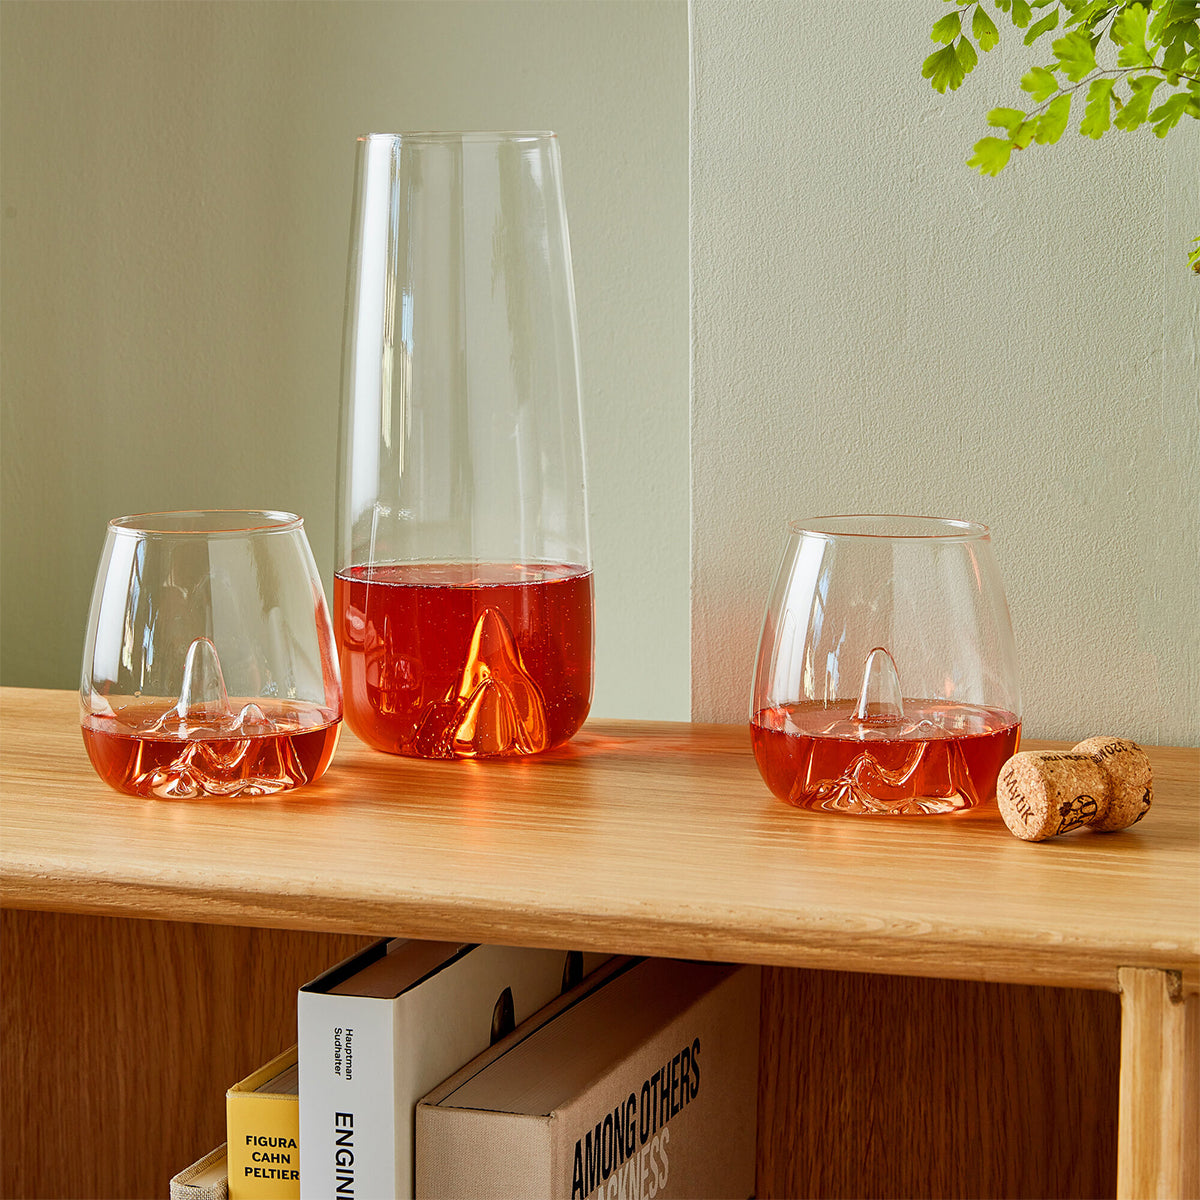 Image of a glass carafe and a pair of glass tumblers filled with an orange liquid sitting on a timber bookshelf against a light olive green wall. The carafe & glasses are indented with the shape of a mountain peak indented into their base.